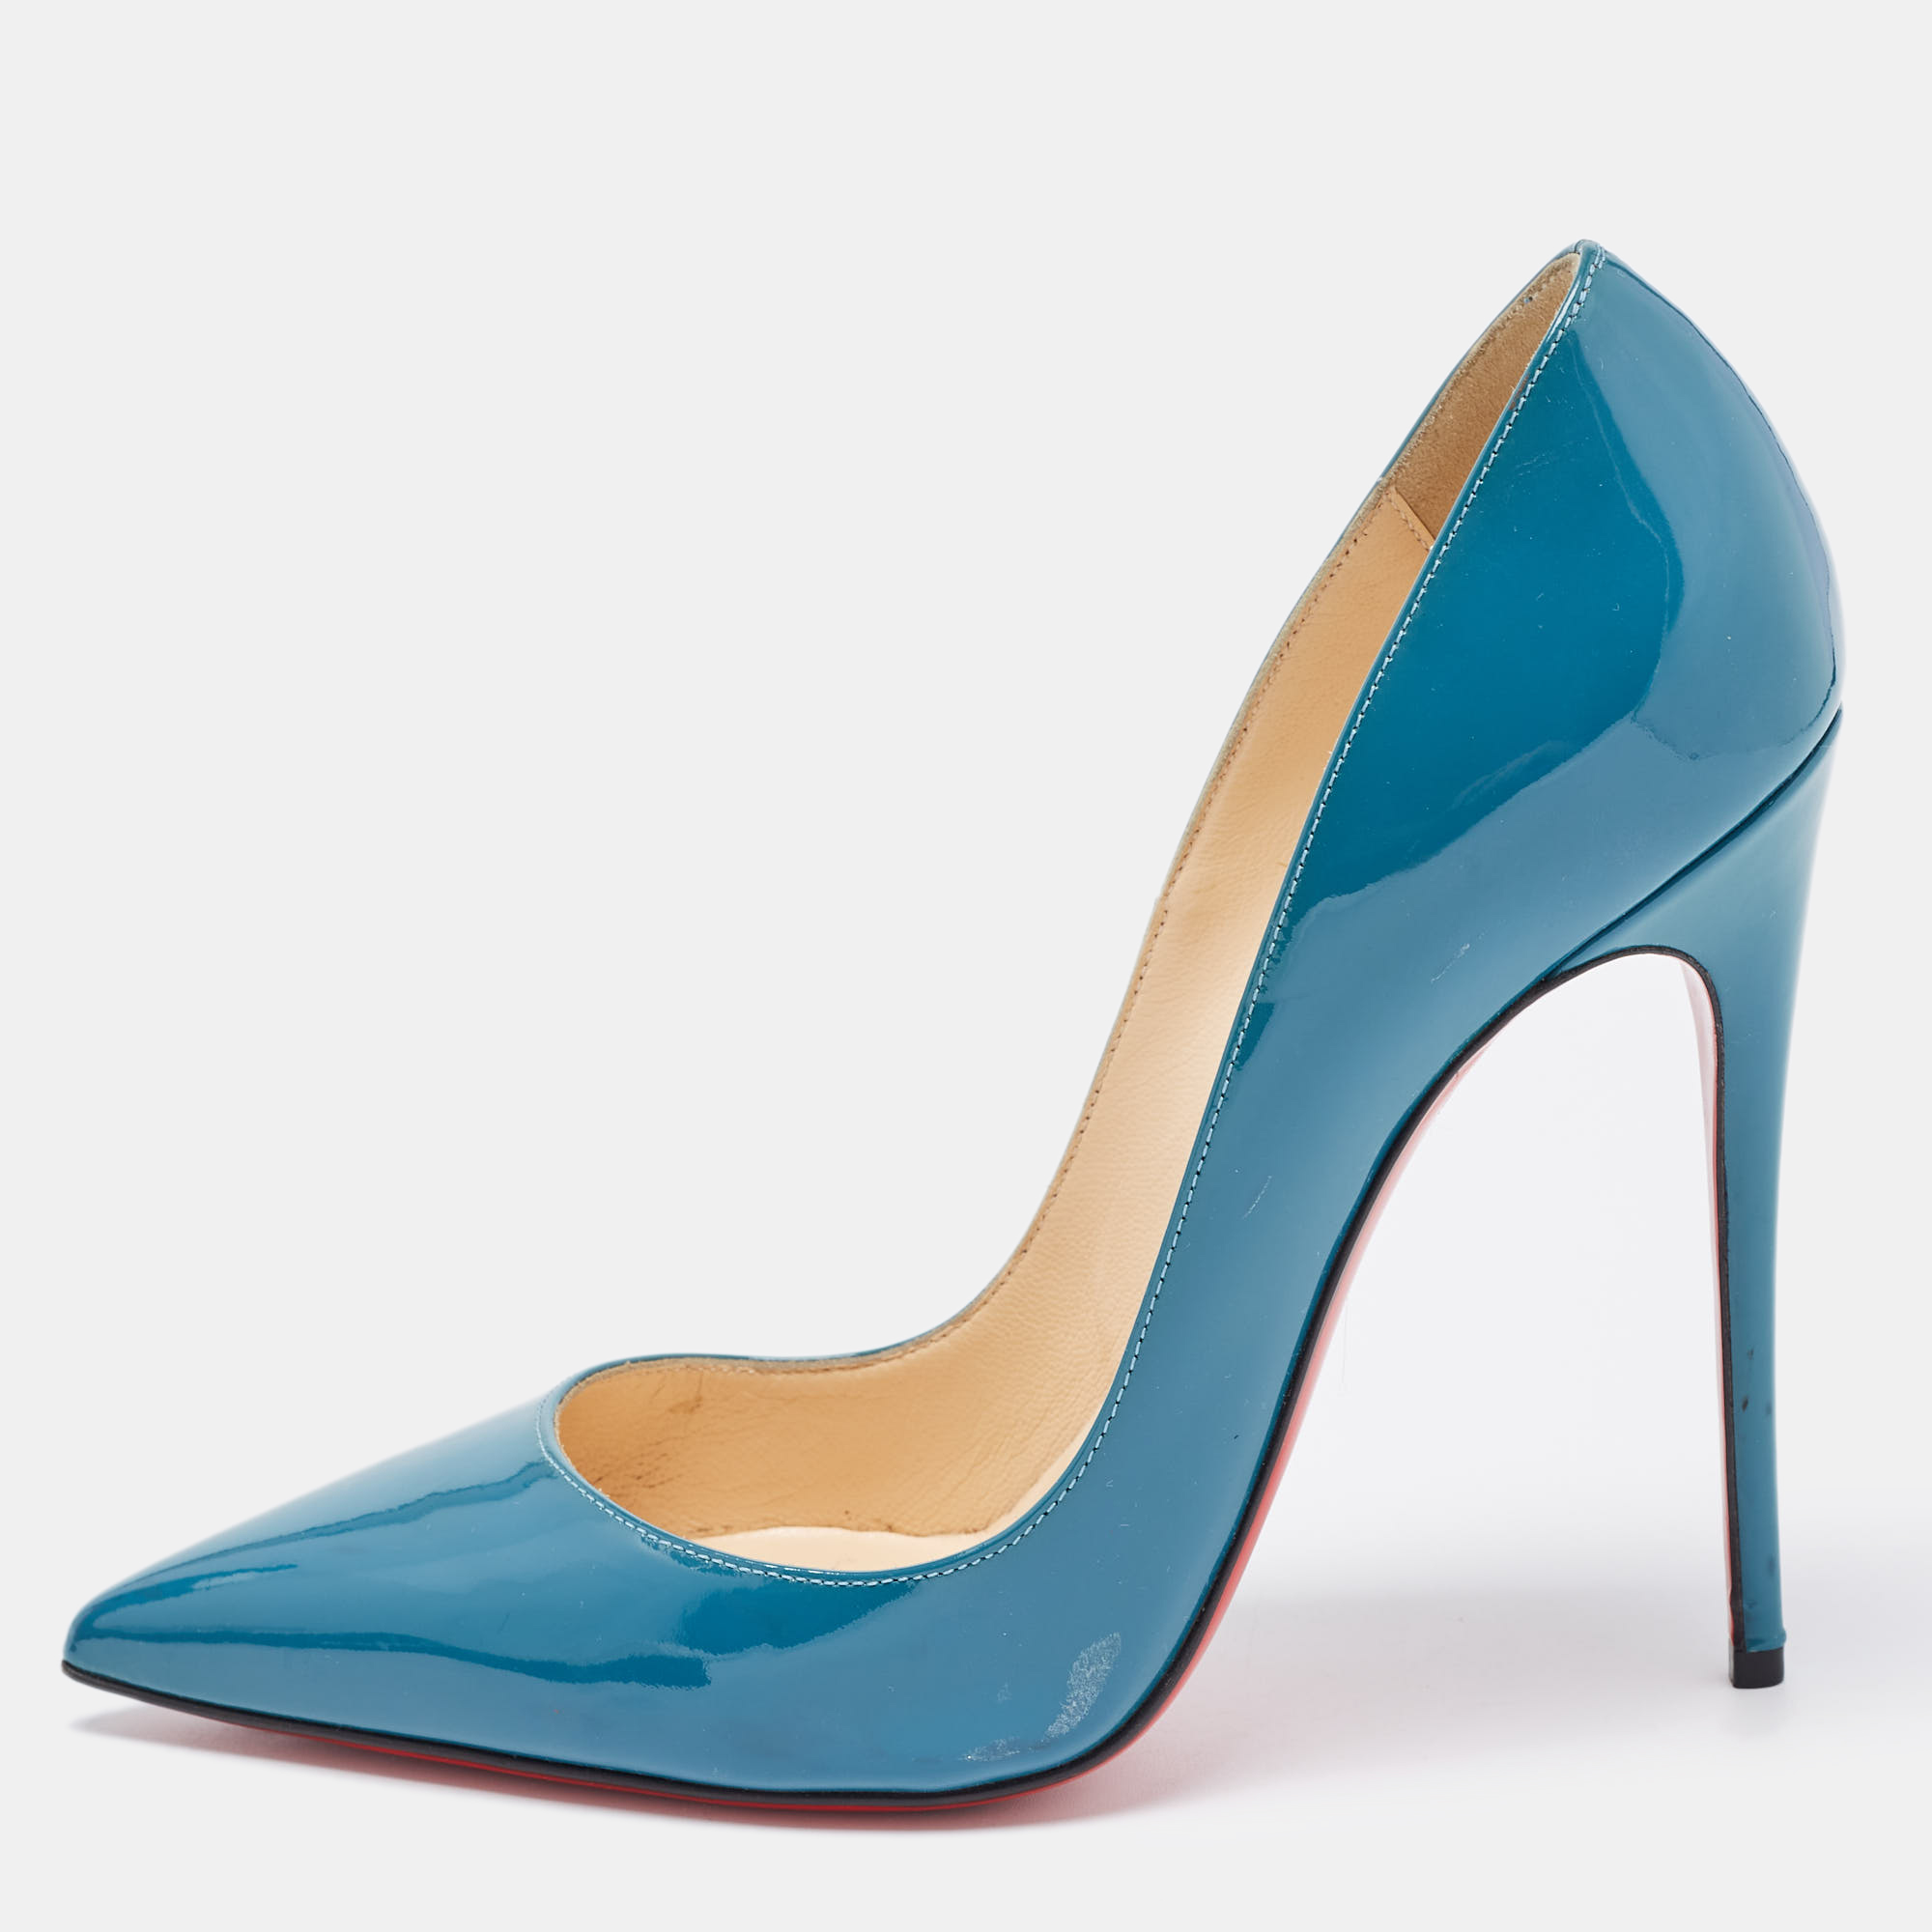 Christian Louboutin Teal Patent Leather So Kate Pumps Size 37.5